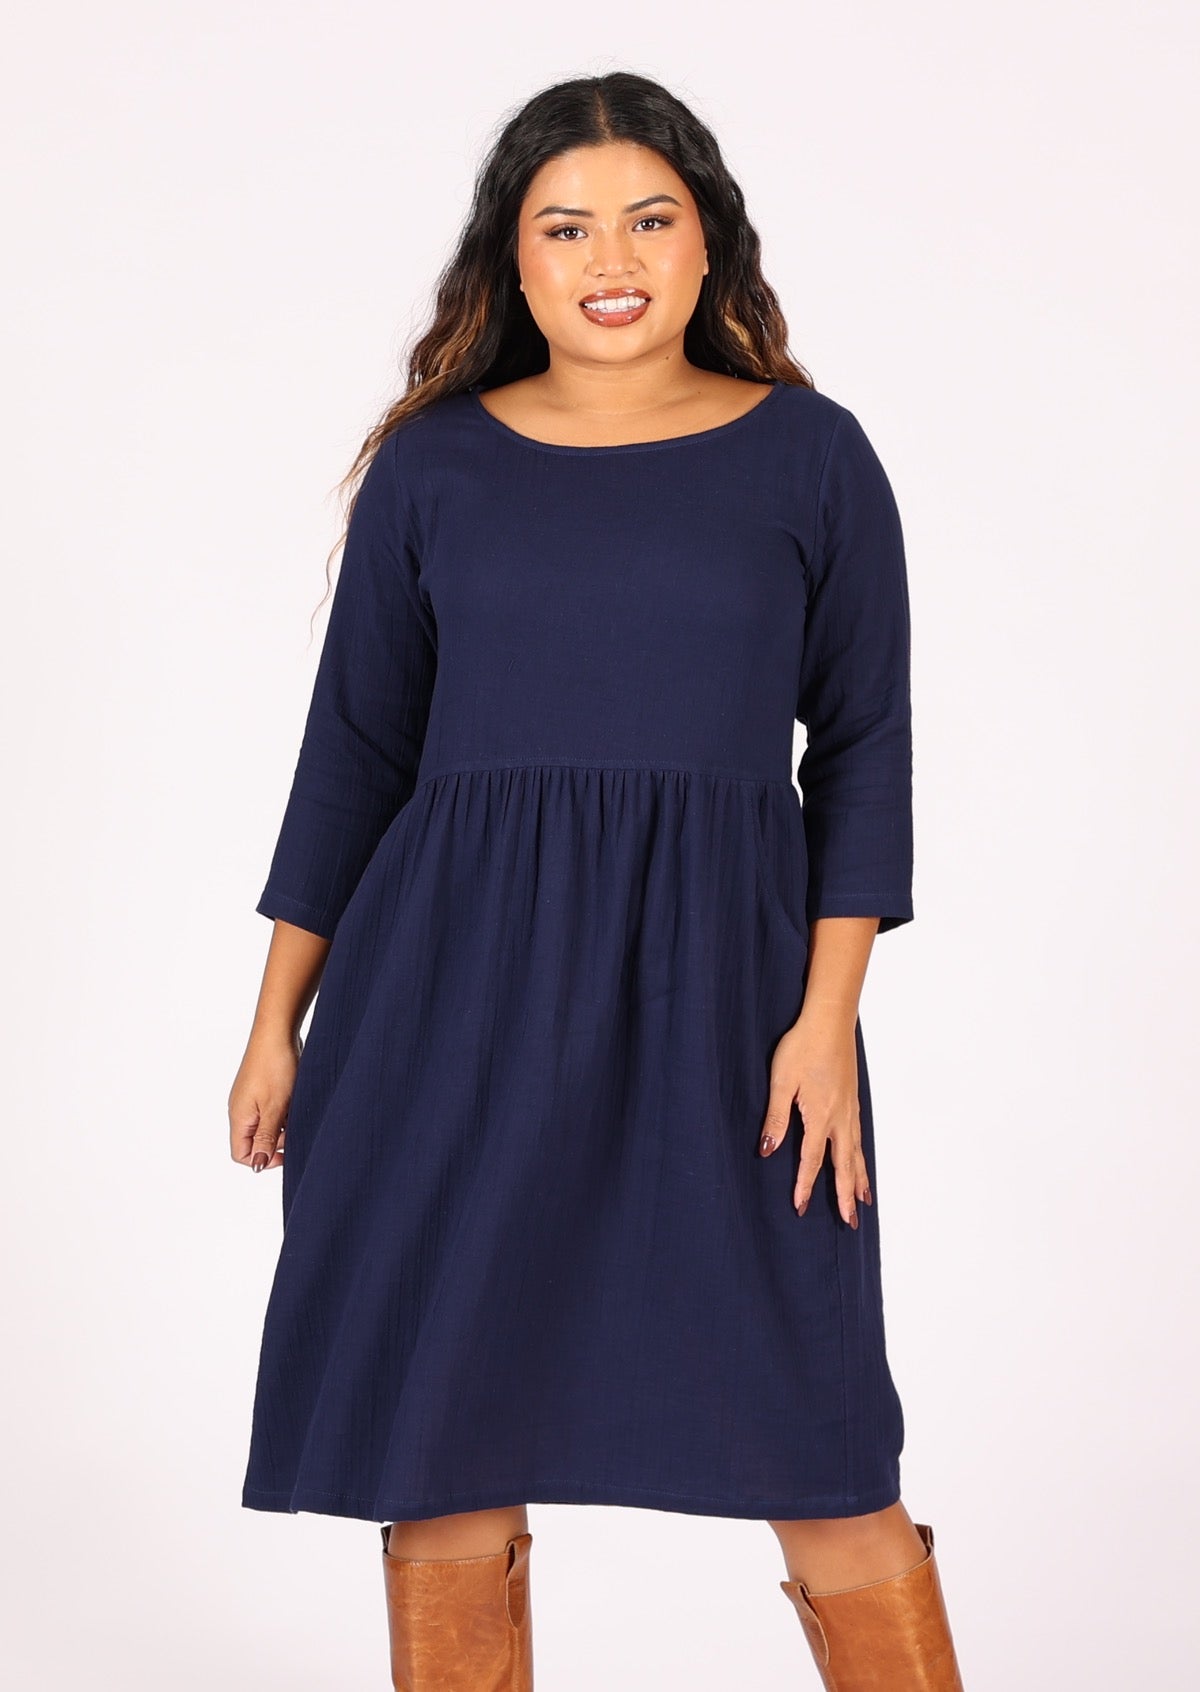 Lightweight cotton gauze relaxed fit dress with 3/4 sleeves